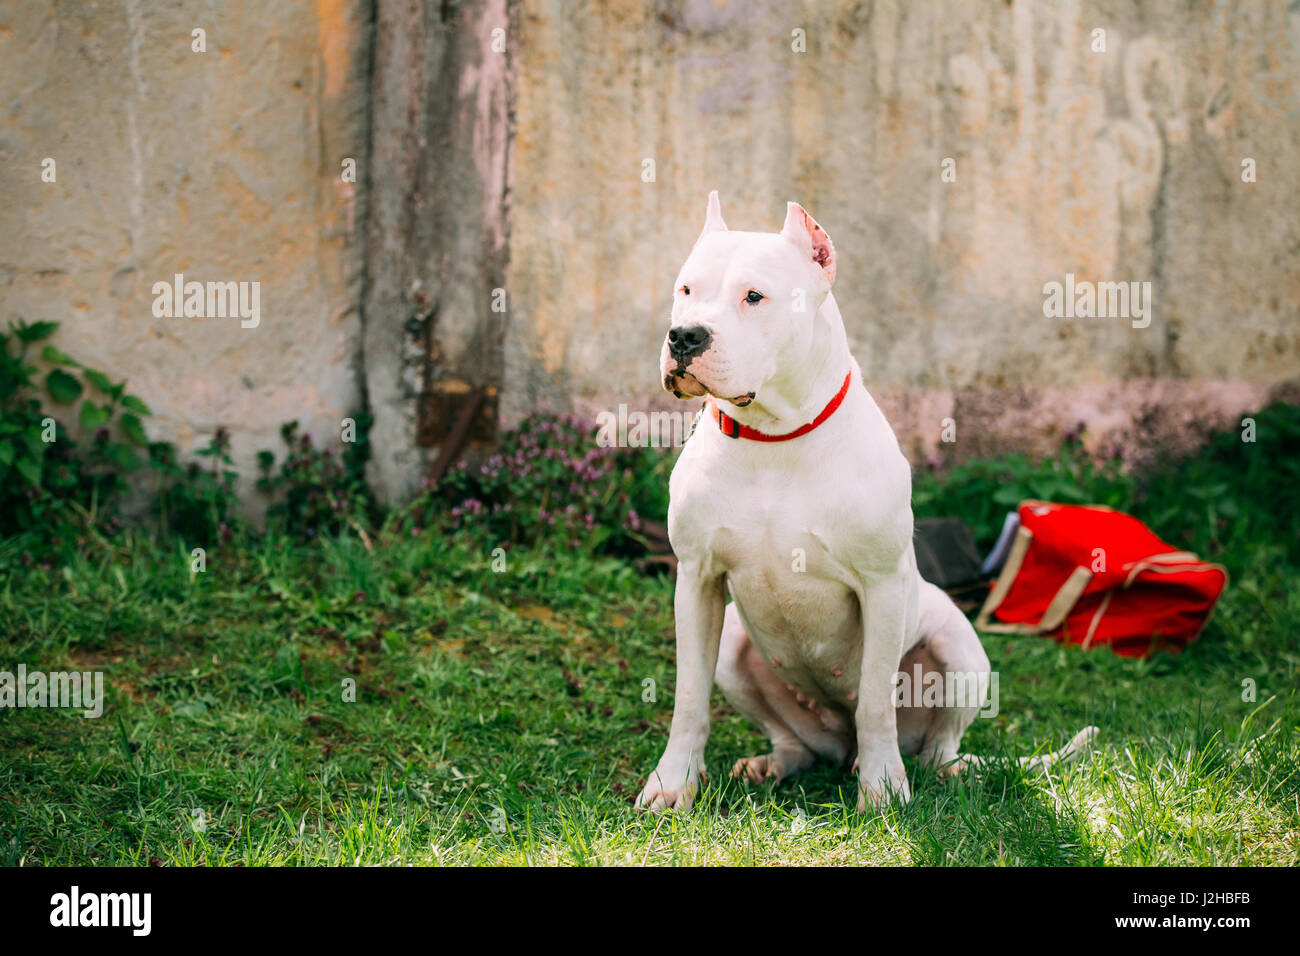 White Dog Of Dogo Argentino Also Known As The Argentine Mastiff Is A Large, White, Muscular Dog That Was Developed In Argentina Primarily For Purpose  Stock Photo